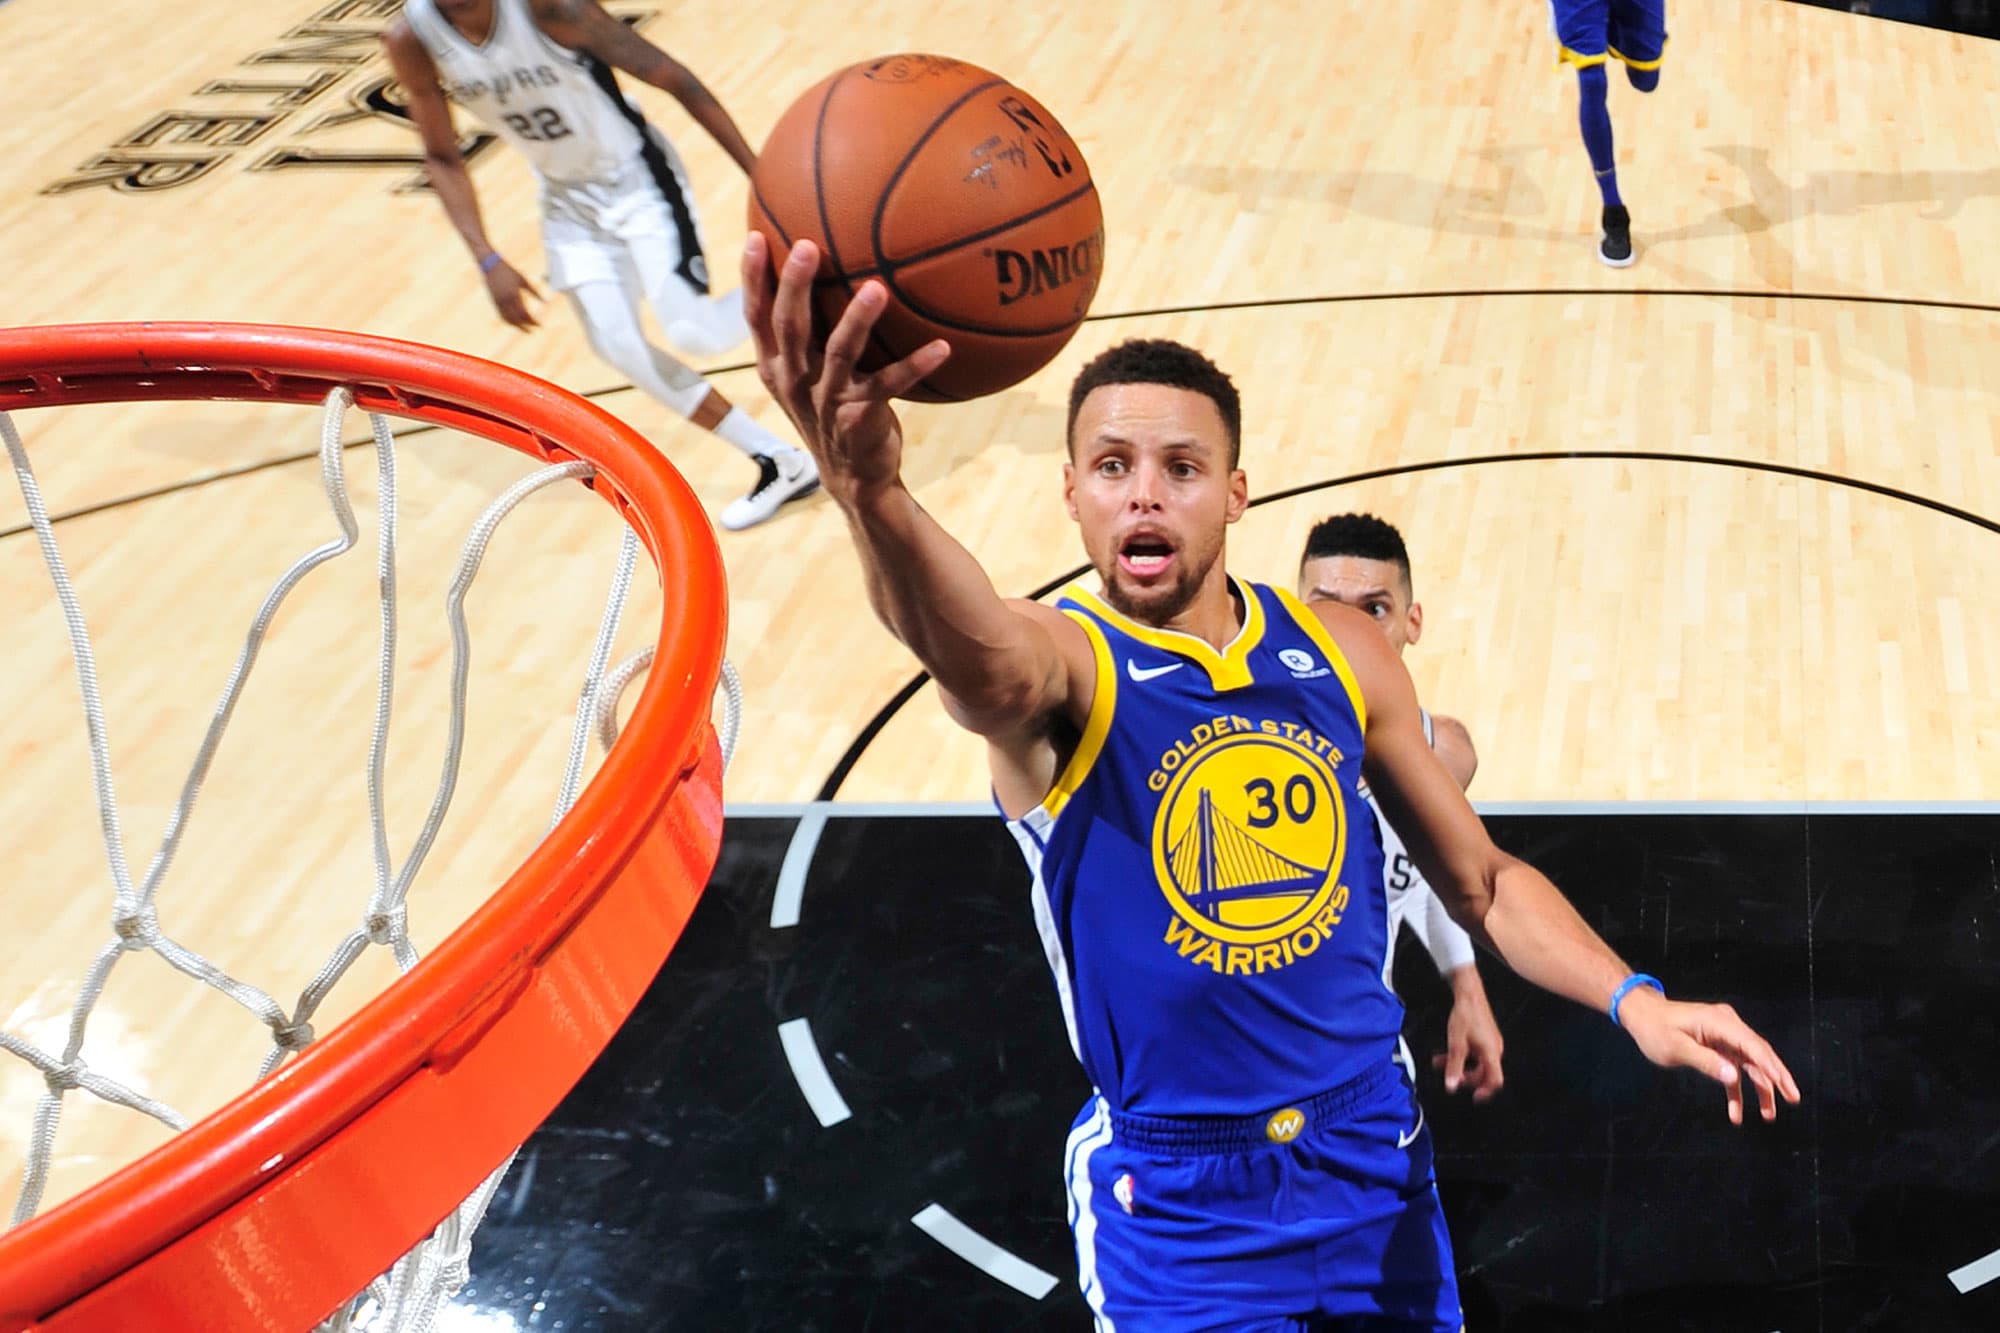 Learn how to play basketball from NBA star Steph Curry online for $90